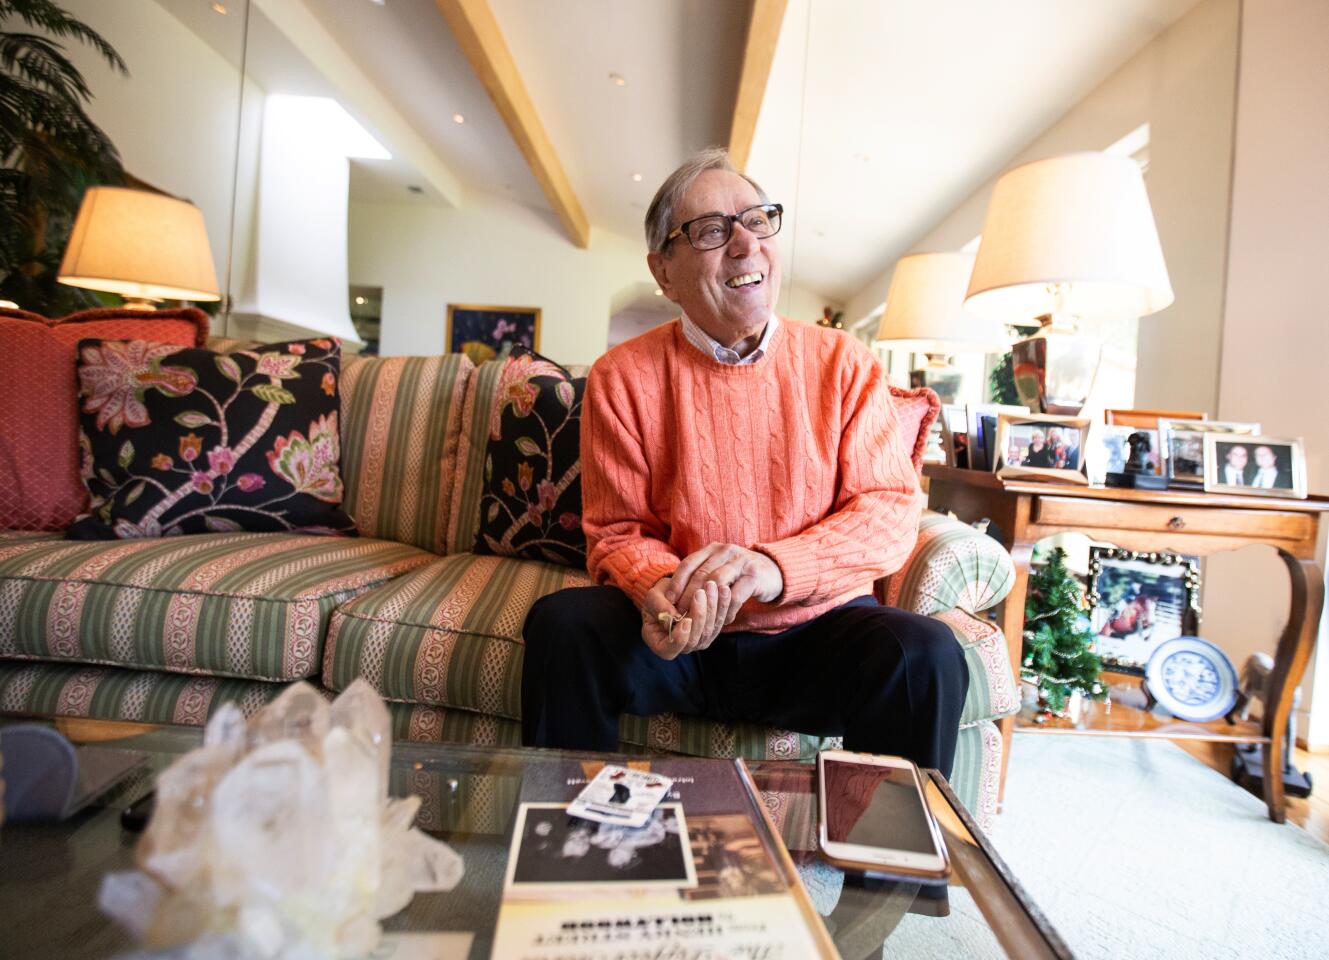 Los Angeles CA., December 18, 2019: Howard Storm, legendary TV director from the 70s, 80s, 90s, laughs as he changes his hearing aid in his living room at his home in Beverly Hills on Wednesday, December 18, 2019 in Los Angeles, California. Strom directed shows like "Happy Days," "Mork and Mindy" and many others. He also cast Jim Carrey in his first movie.(Jason Armond / Los Angeles Times)